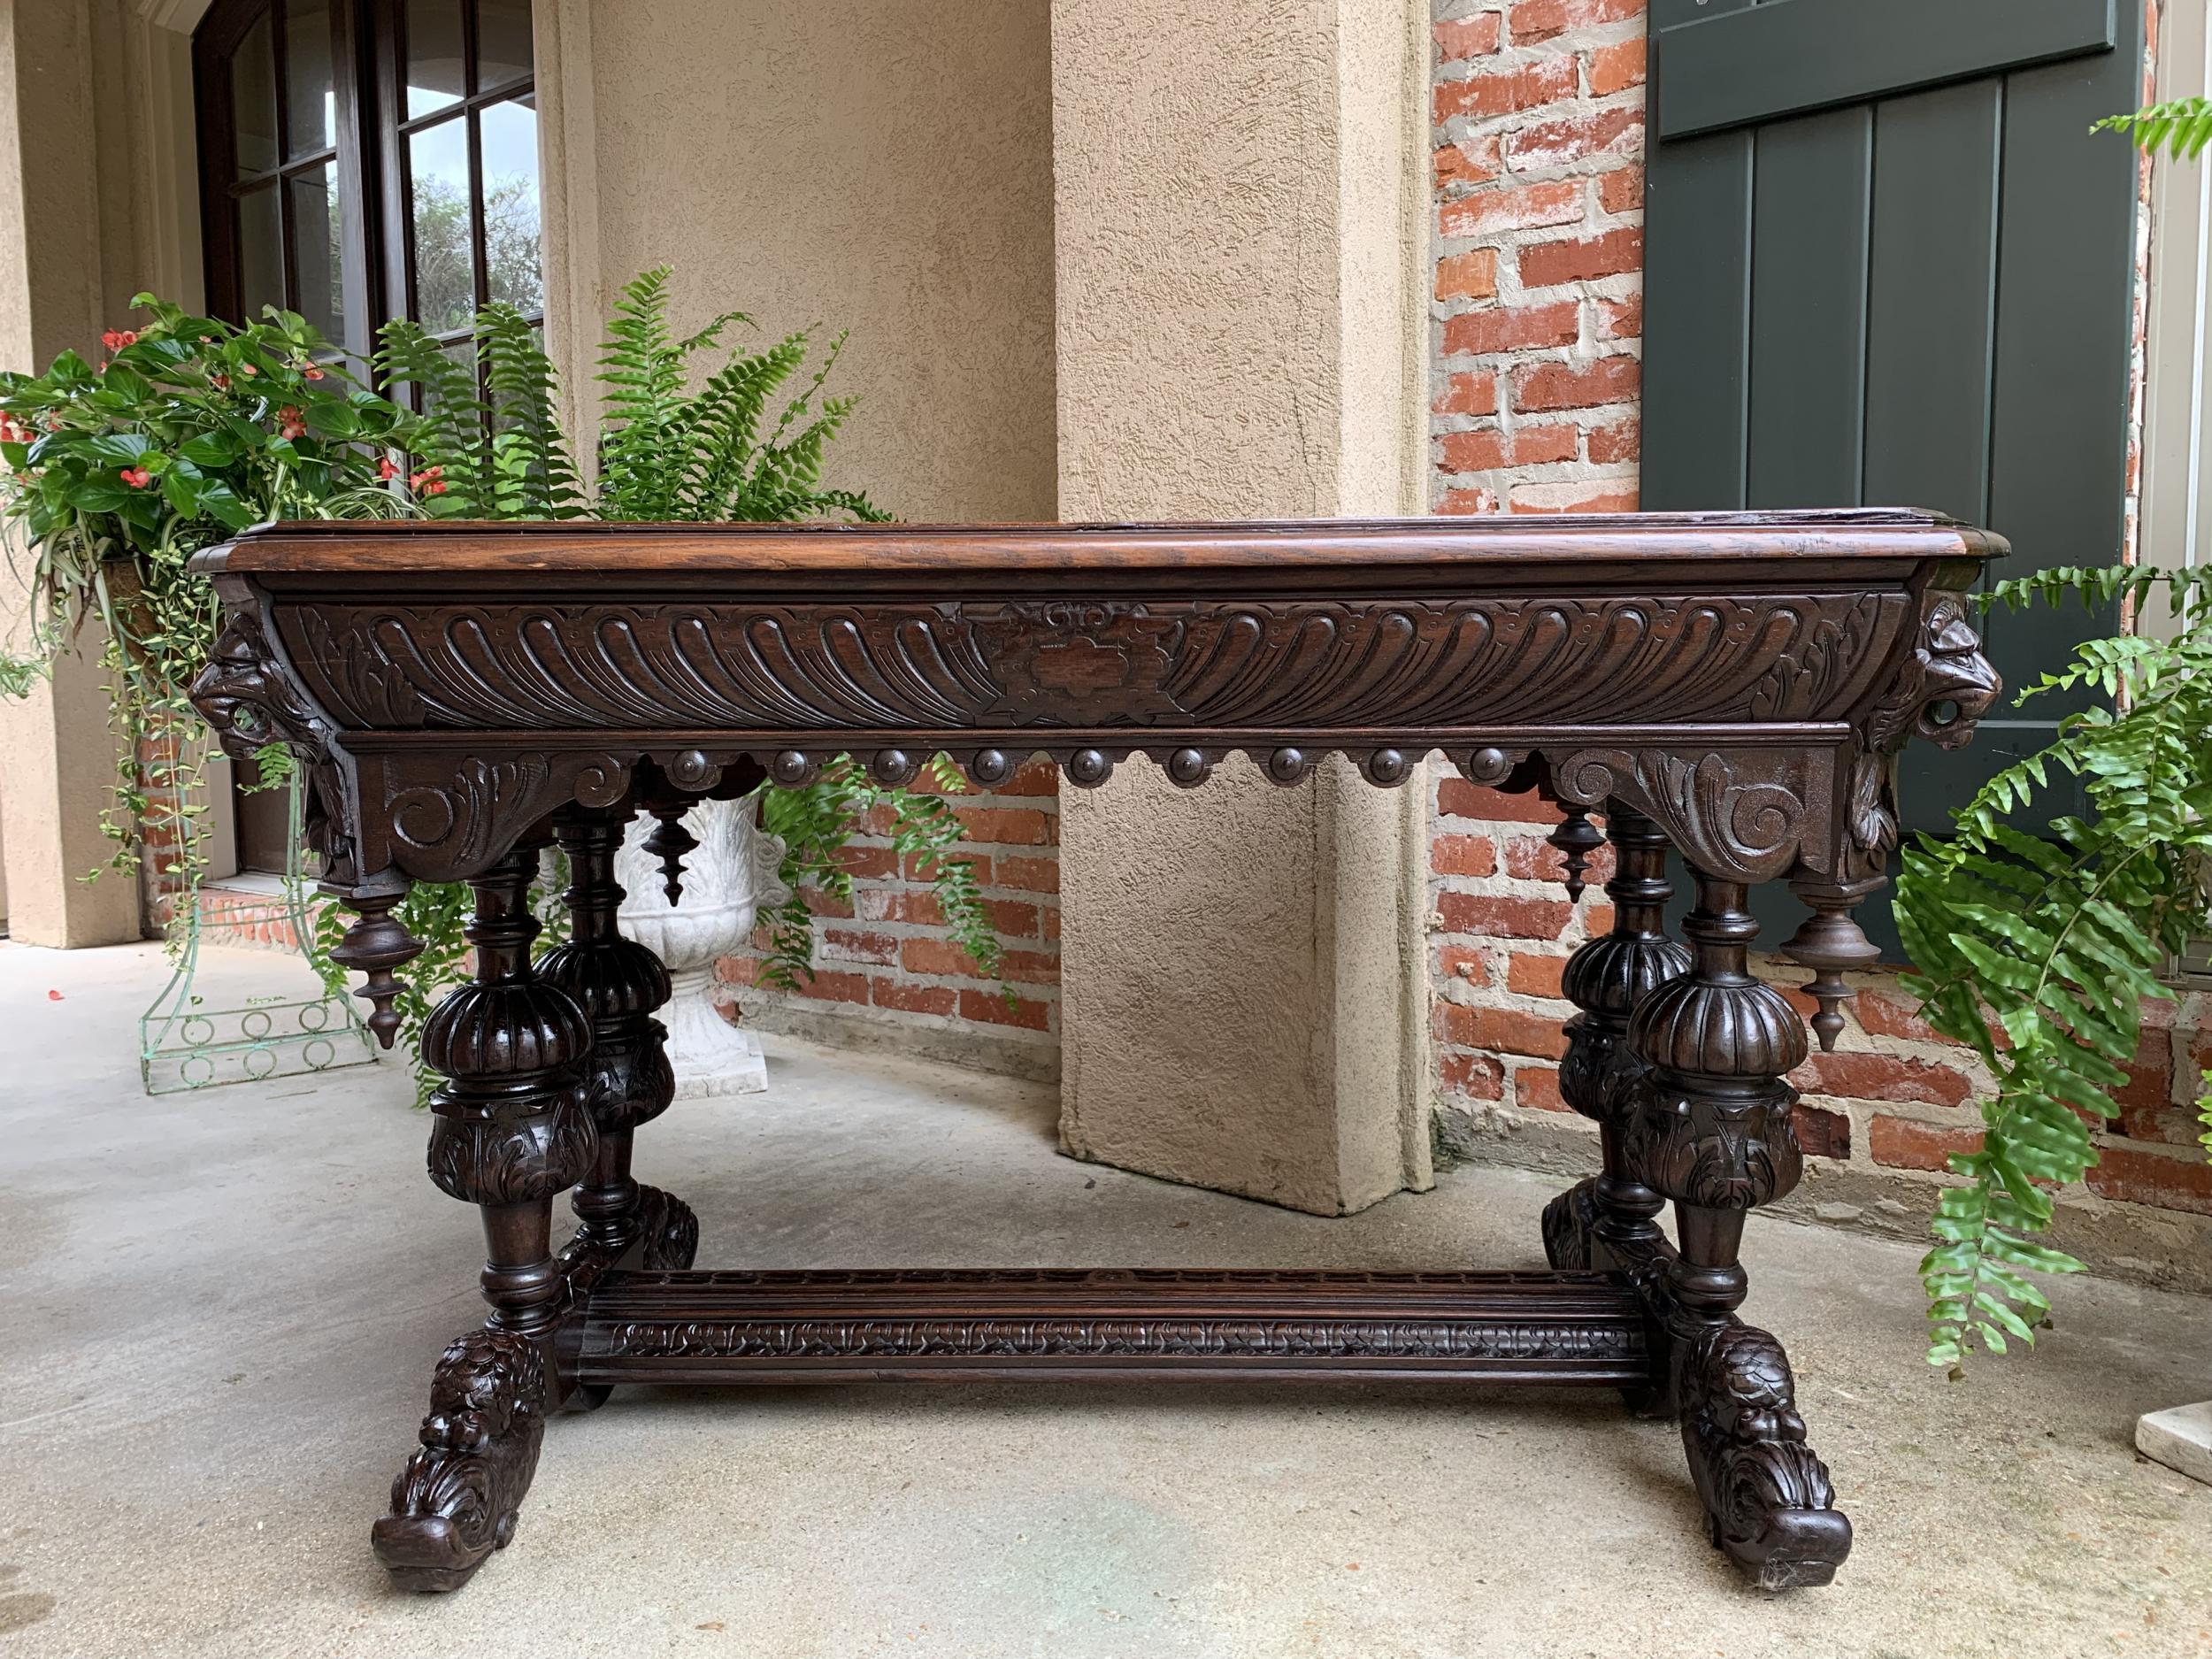 19th century French carved oak dolphin library table desk Renaissance Gothic

~Direct from France~
An elegant antique French carved library table or 